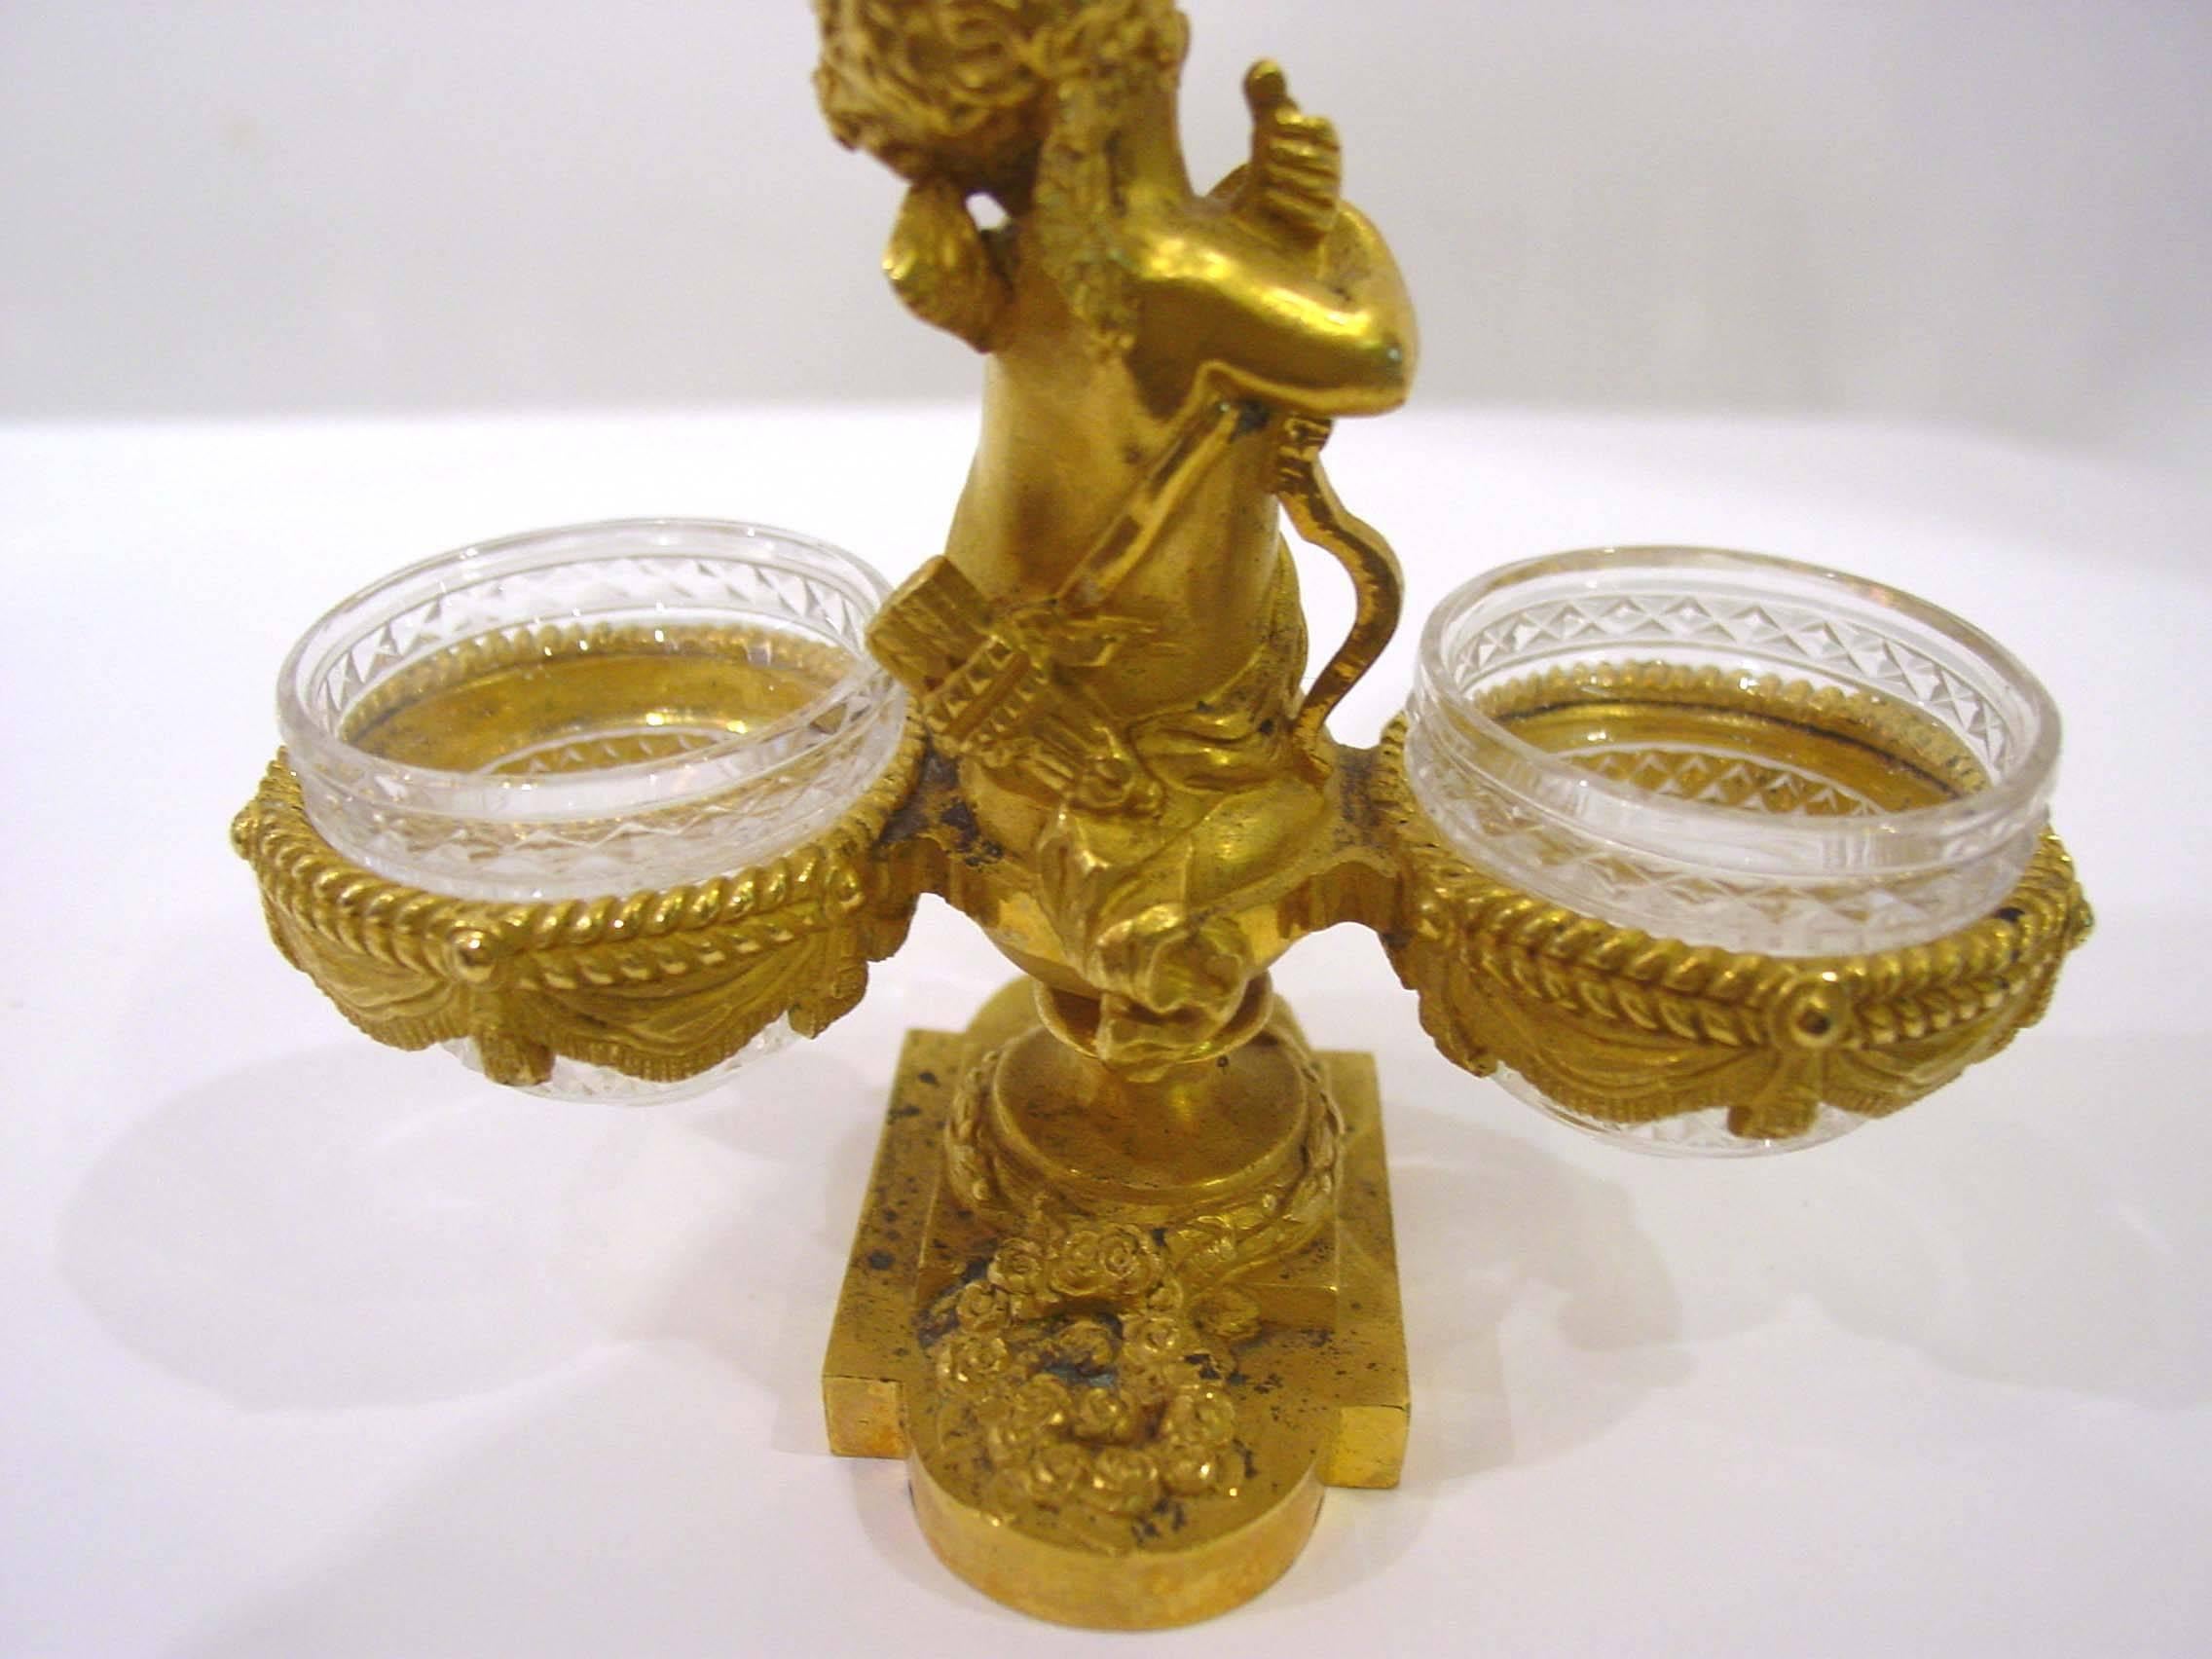 Carved Maison Baccarat Gilt Bronze and Crystal Salt Cellars and Vase 19th Century